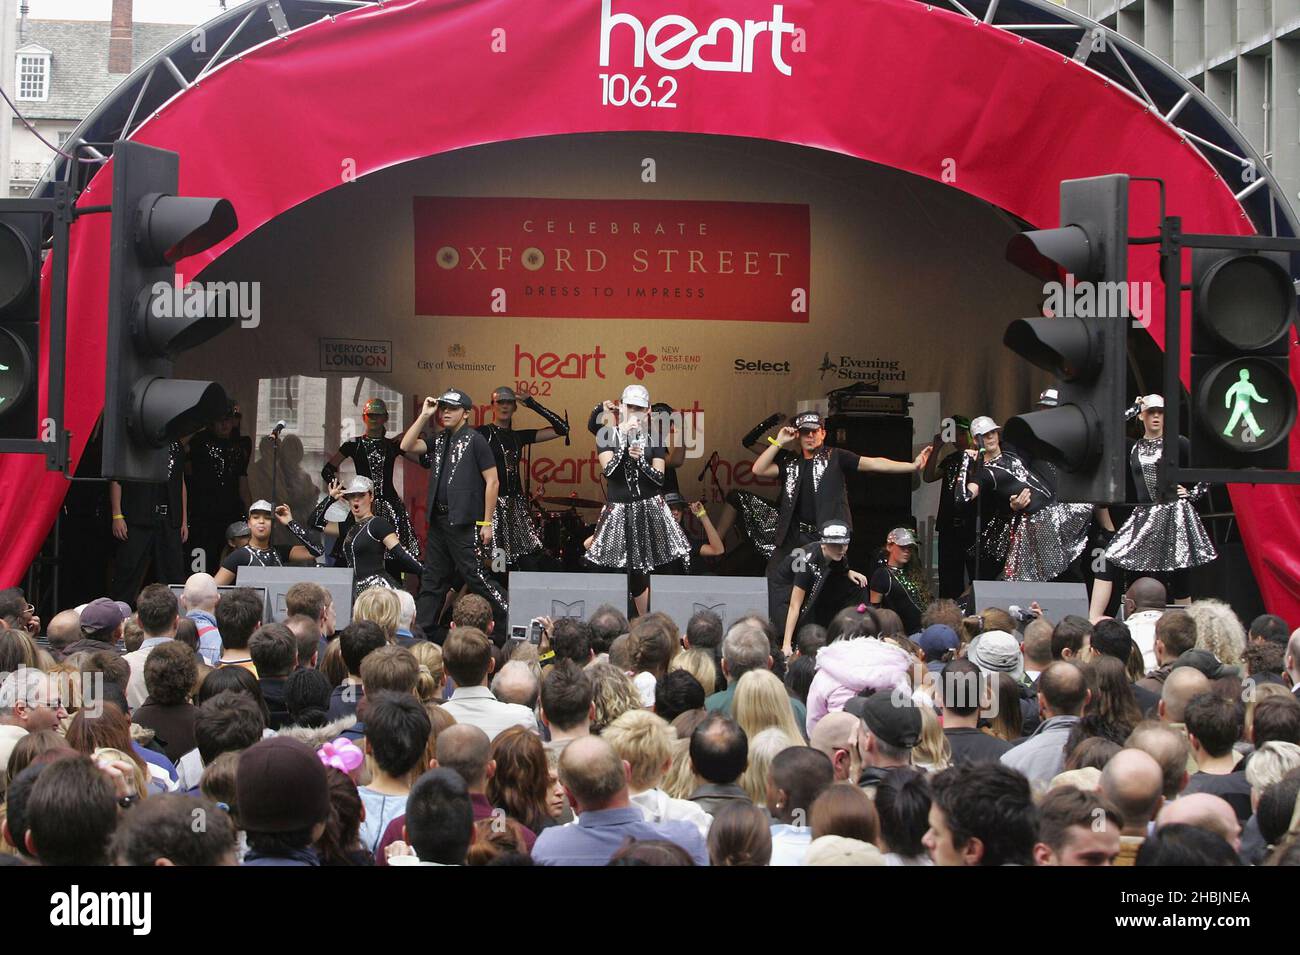 Transe Express perform on stage at the 'Celebrate Oxford Street: Dress To Impress' in London. Stock Photo